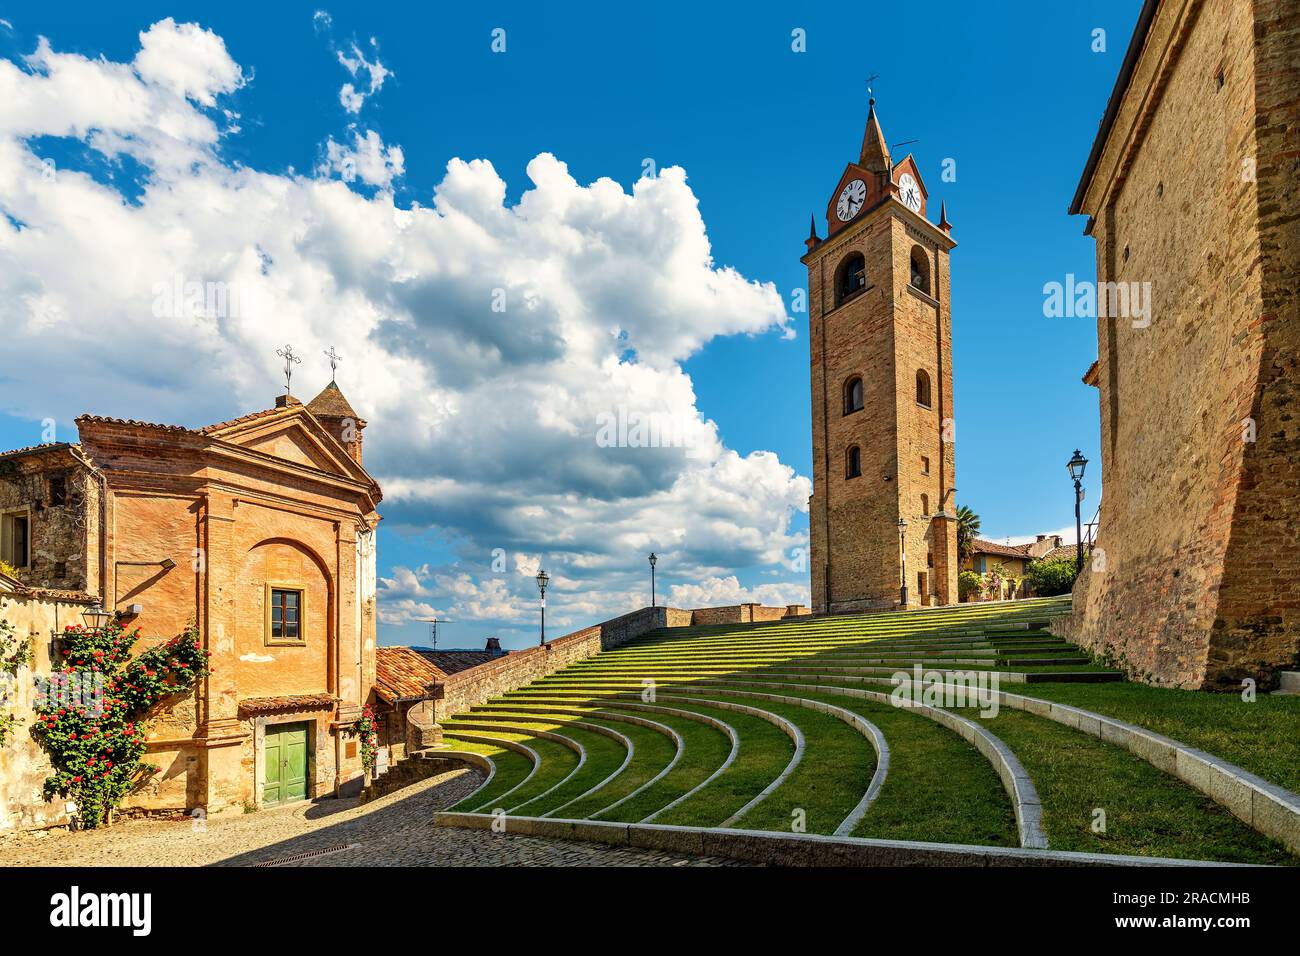 Small church, belfry and open air amphitheater under blue sky with white clouds in small town of Monforte d'Alba, Italy. Stock Photo